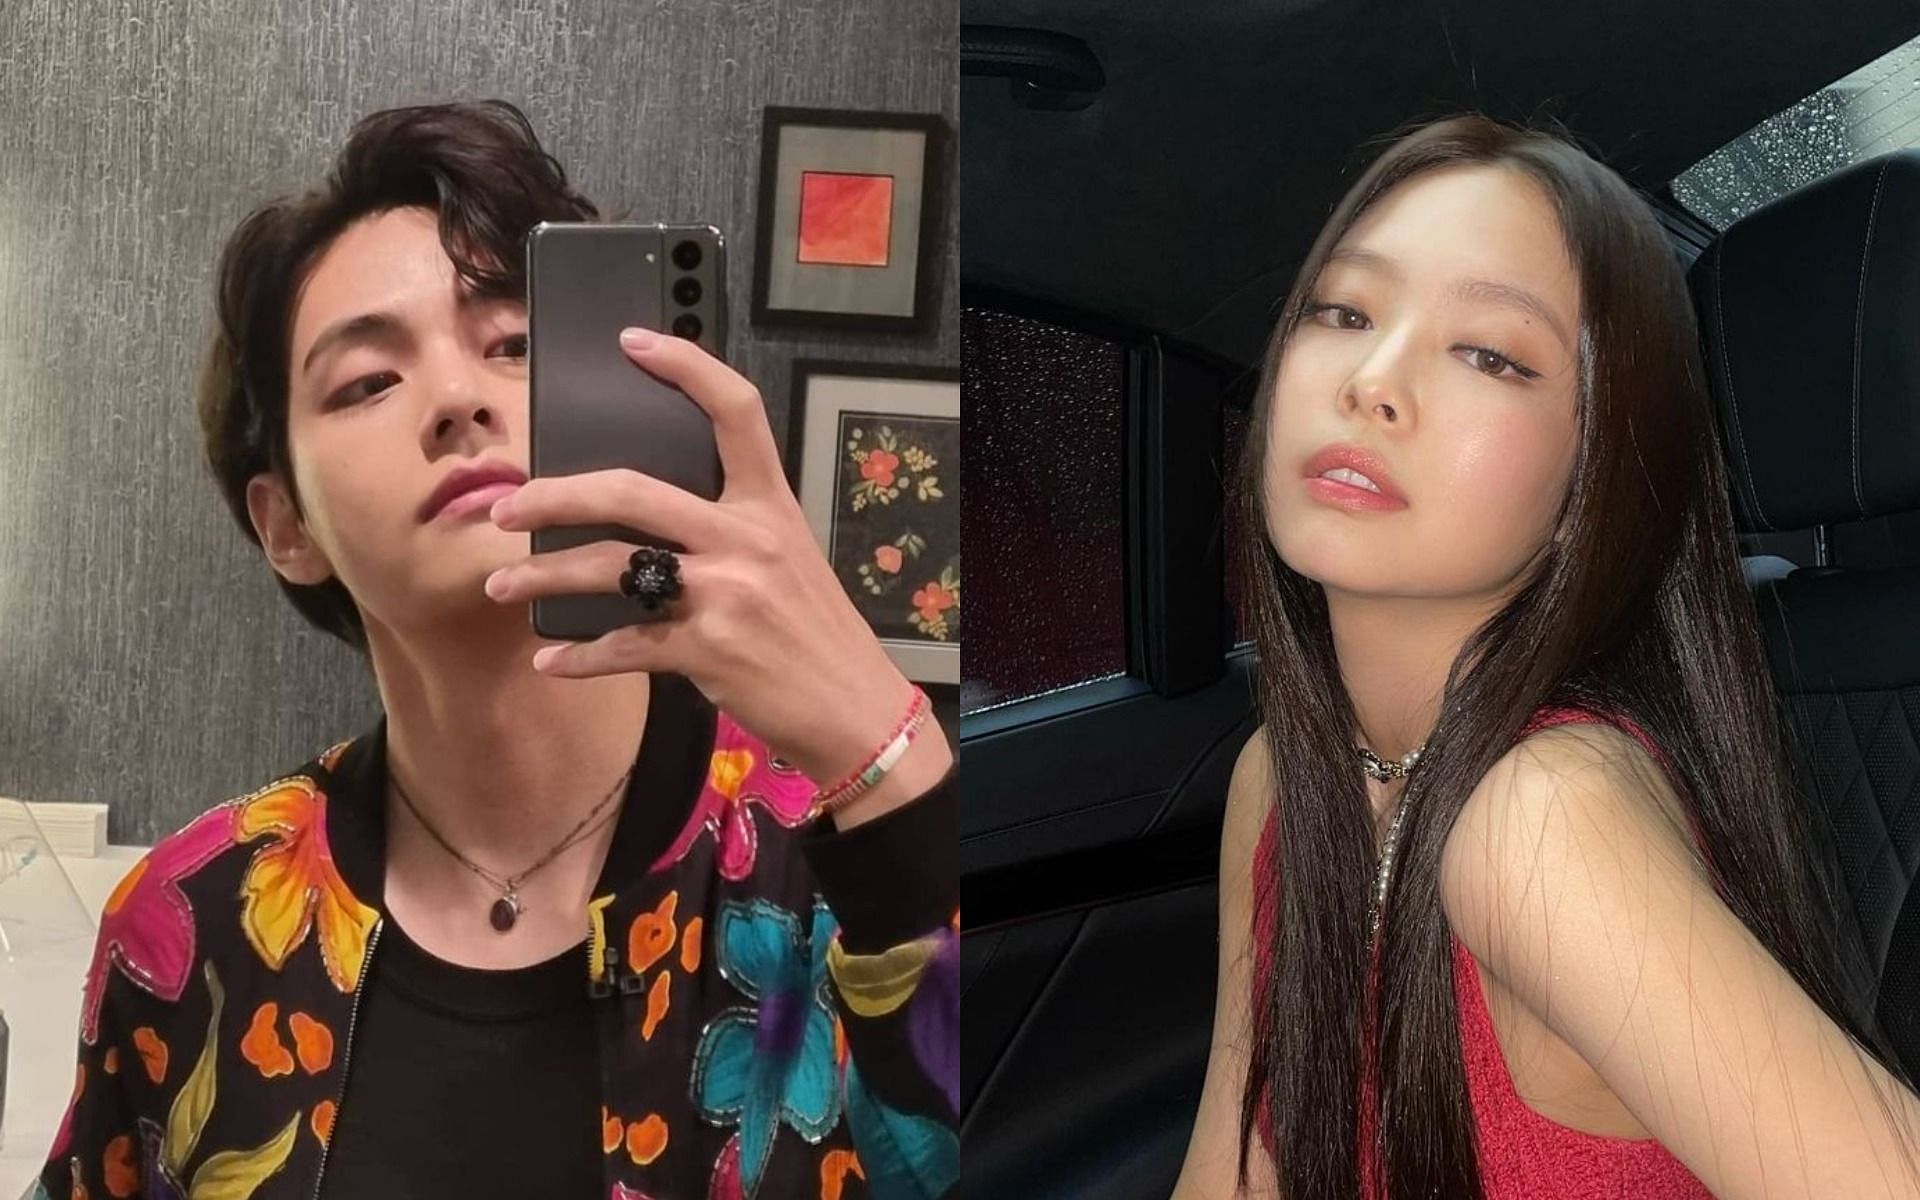 Bts Kim Taehyung Accidentally Following Blackpink Jennie S Instagram Account Leads To An Uproar